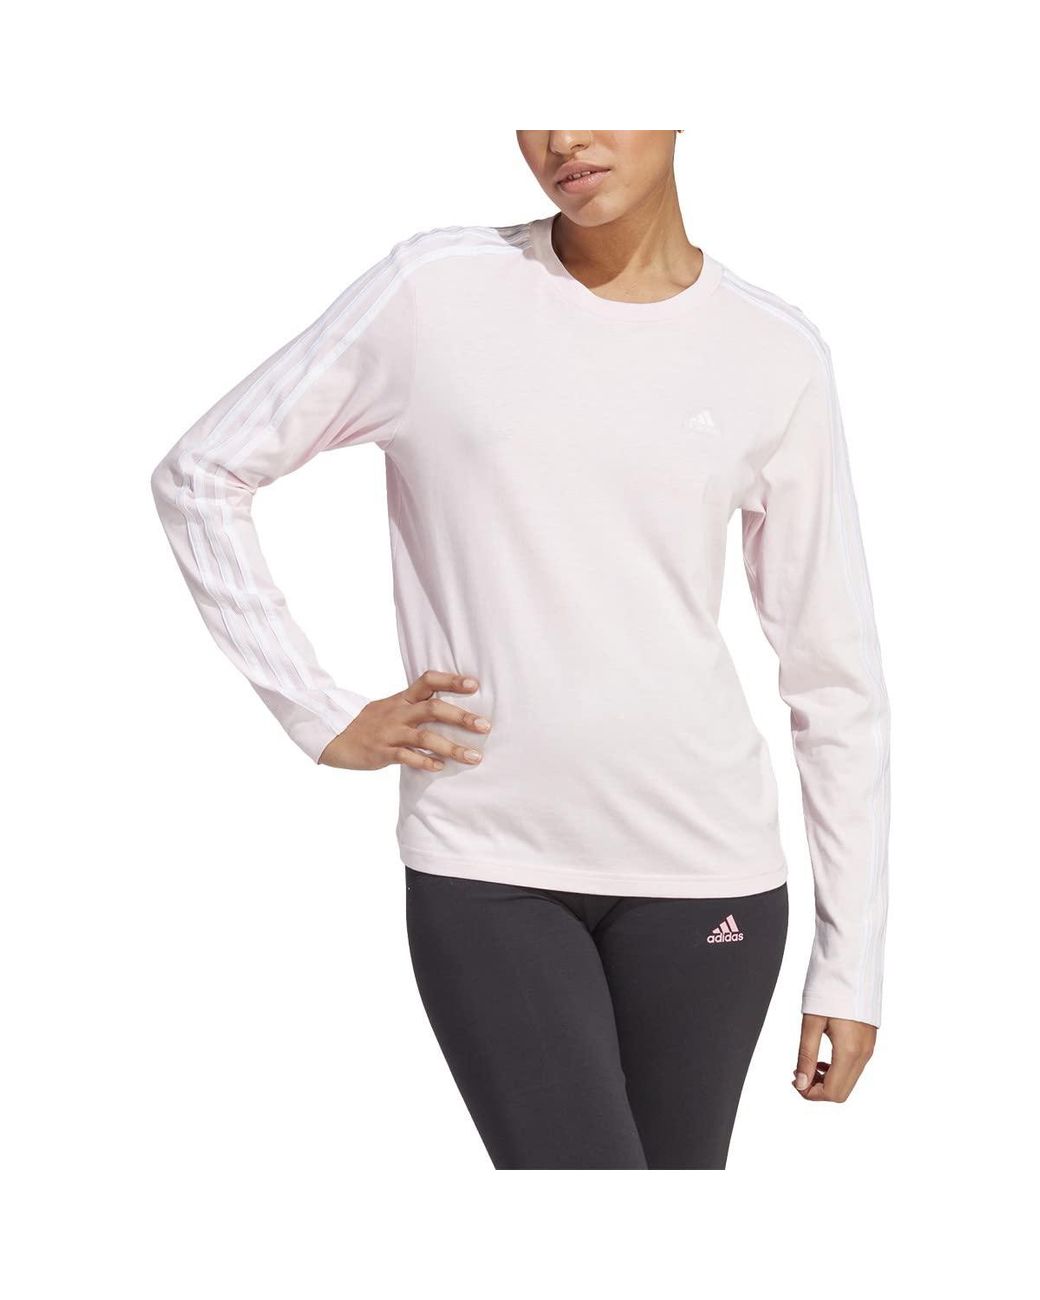 adidas Essentials 3-stripes Long Sleeve T-shirt in White | Lyst